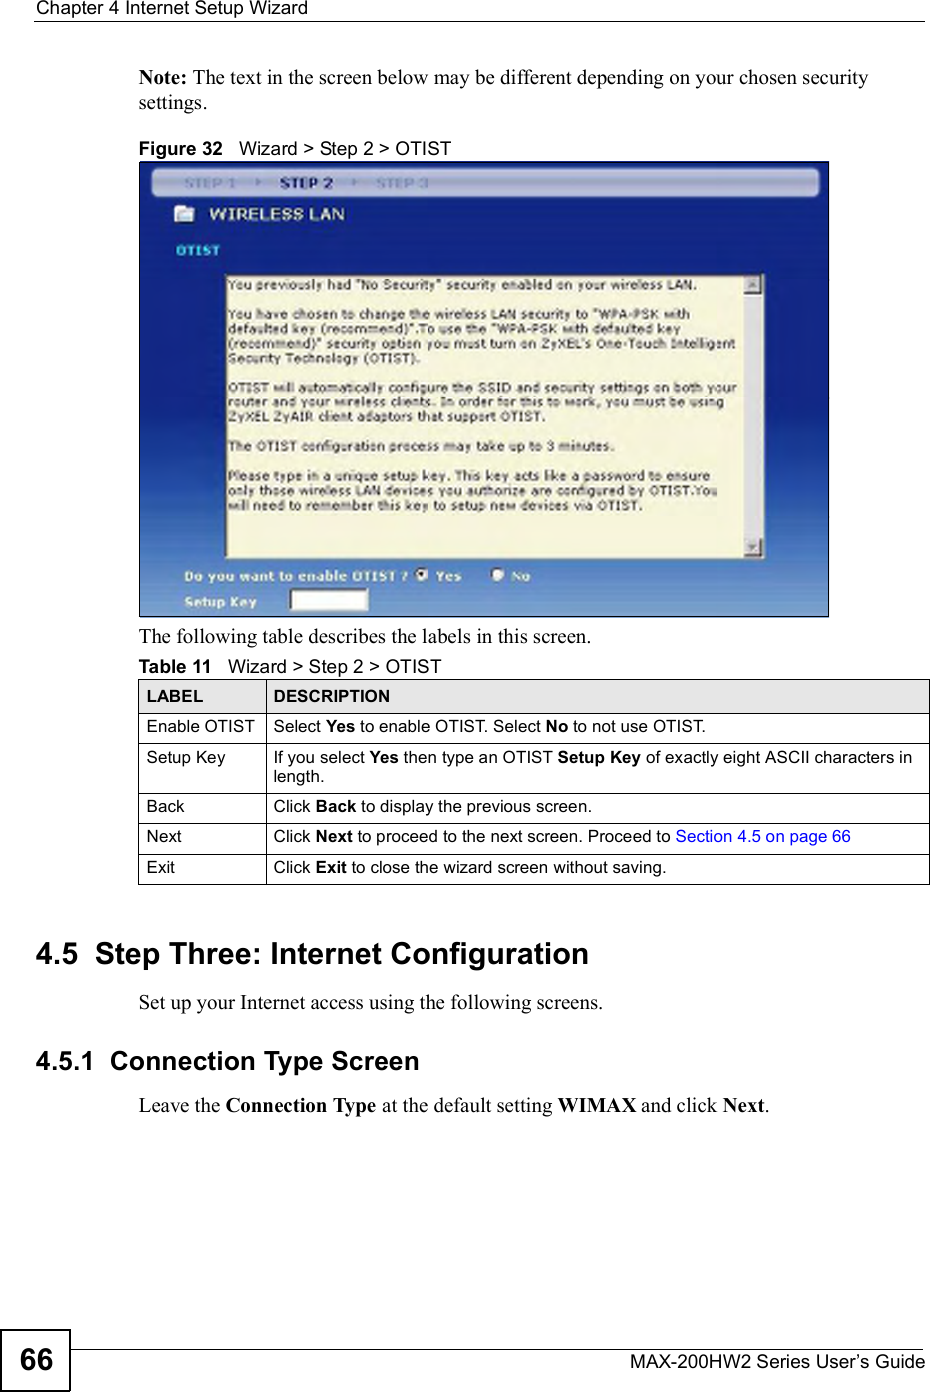 Chapter 4Internet Setup WizardMAX-200HW2 Series User s Guide66Note: The text in the screen below may be different depending on your chosen security settings.Figure 32   Wizard &gt; Step 2 &gt; OTISTThe following table describes the labels in this screen. 4.5  Step Three: Internet ConfigurationSet up your Internet access using the following screens.4.5.1  Connection Type ScreenLeave the Connection Type at the default setting WIMAX and click Next.Table 11   Wizard &gt; Step 2 &gt; OTISTLABEL DESCRIPTIONEnable OTIST Select Yes to enable OTIST. Select No to not use OTIST.Setup Key If you select Yes then type an OTIST Setup Key of exactly eight ASCII characters in length. Back Click Back to display the previous screen.Next Click Next to proceed to the next screen. Proceed to Section 4.5 on page 66Exit Click Exit to close the wizard screen without saving.